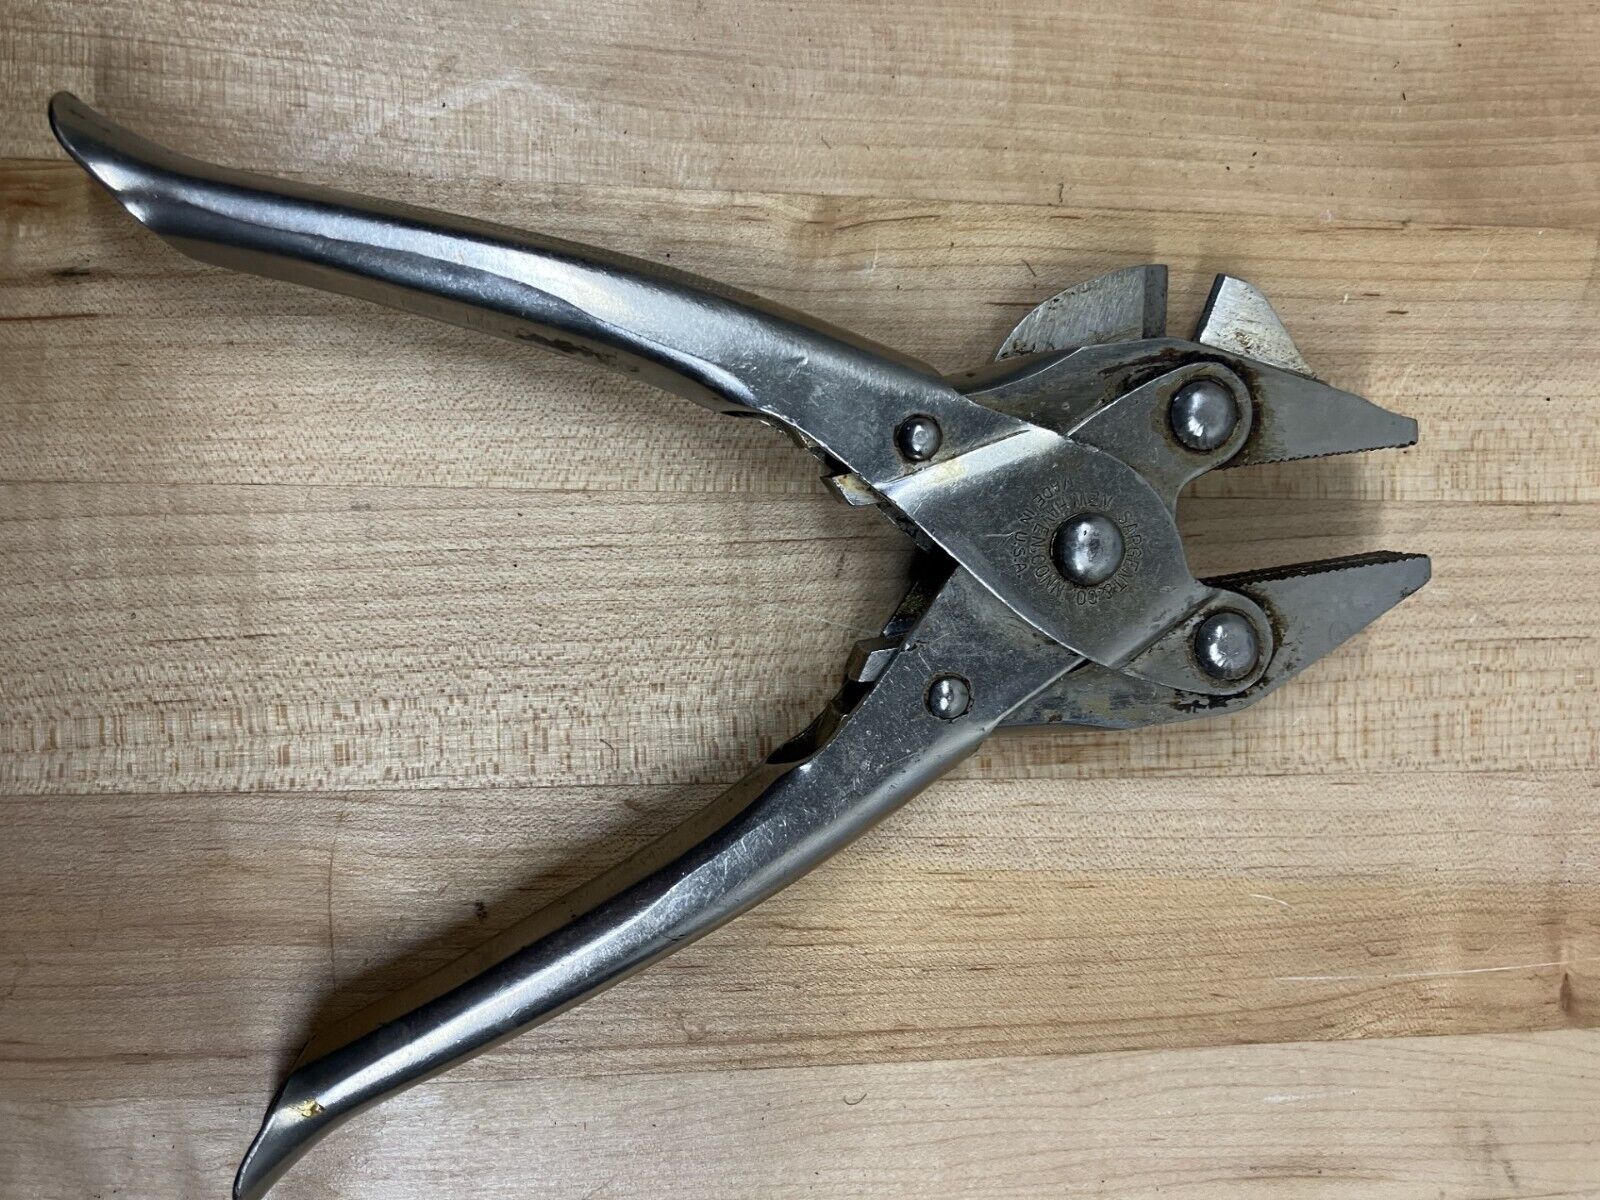 Vintage Sargent Multitool Grip Snip Pliers With Side Cutters (Made in USA)